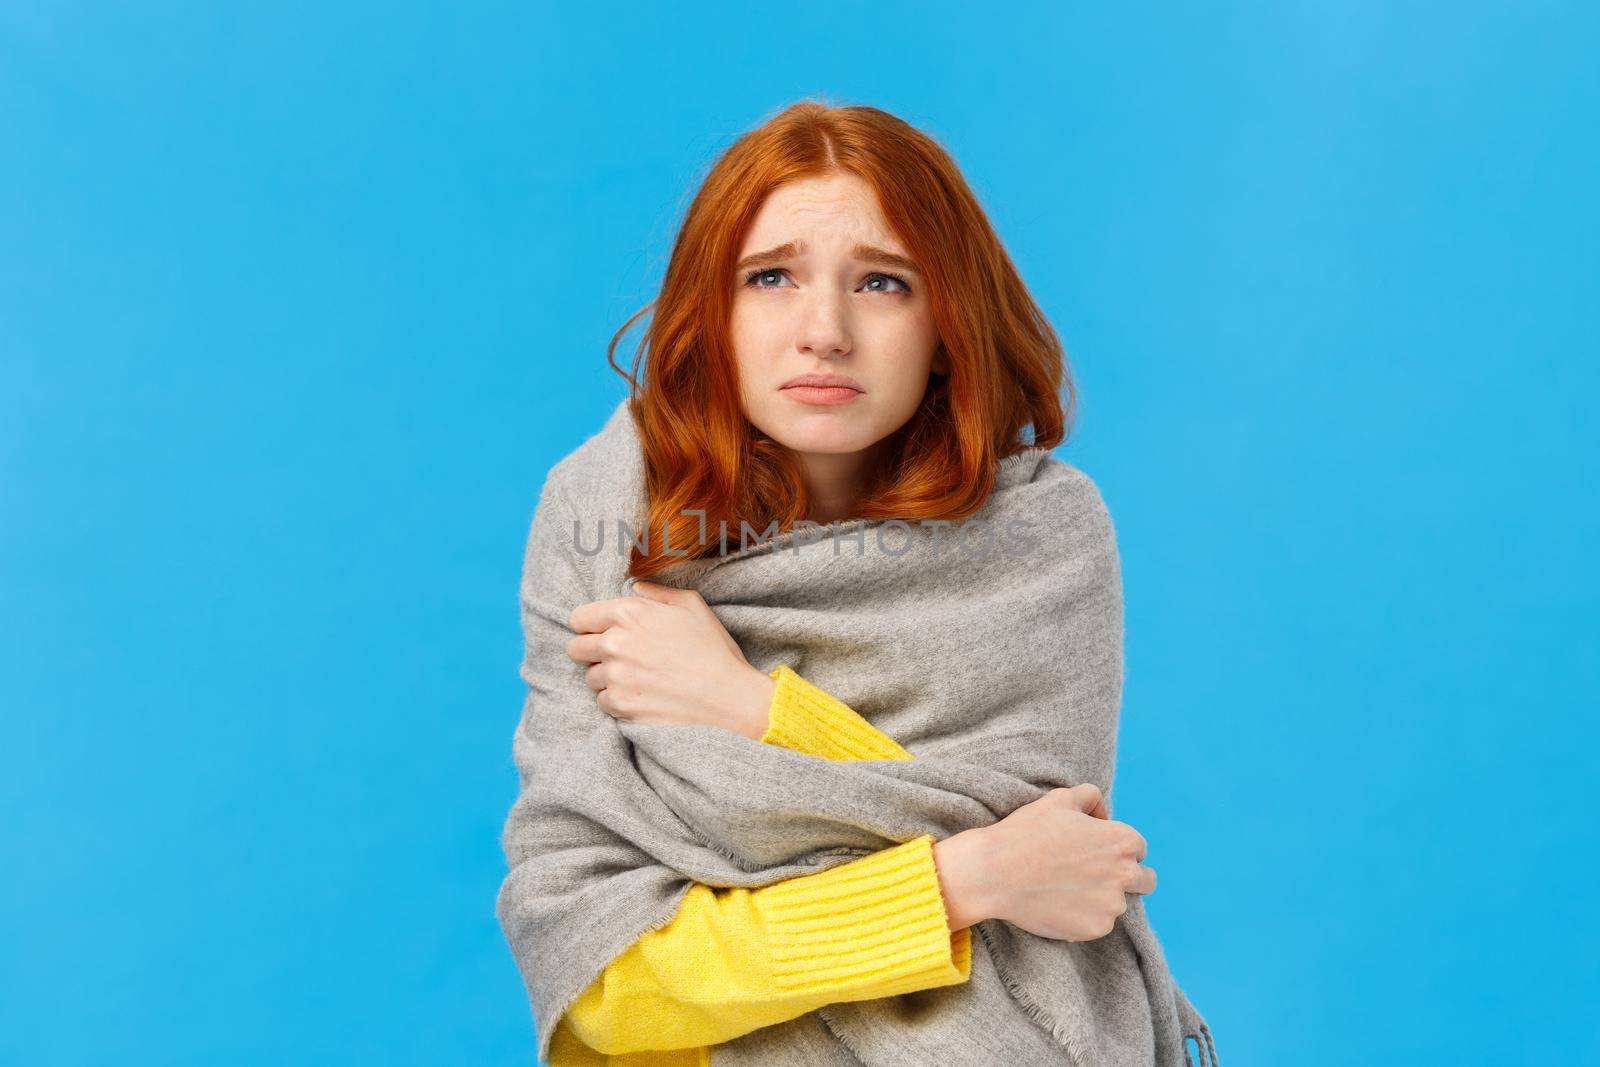 Girl sitting dormitory with broken heater, wrapping herself with warm scarf, looking upset and unwell upper left corner, grimacing suffer discomfort low temprature, catching cold, blue background.